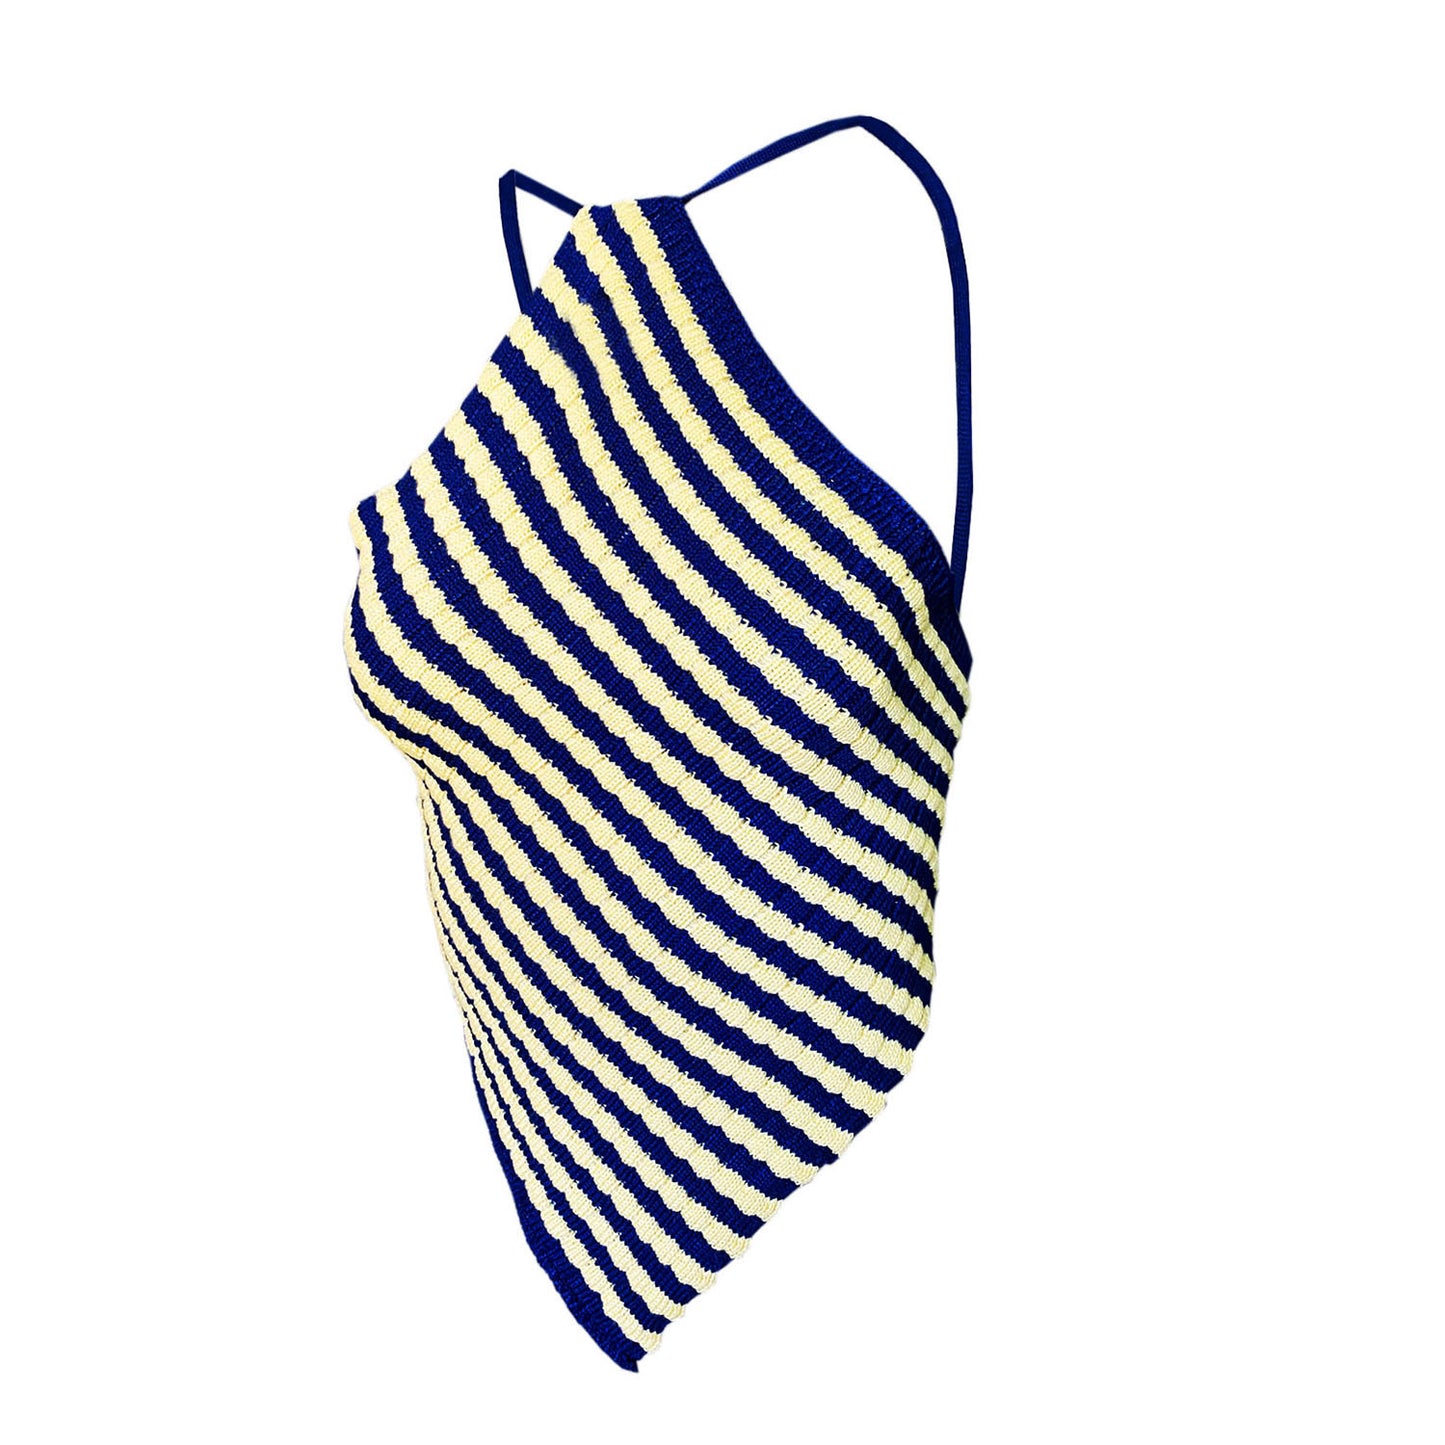 Spring Summer Arrival Women Clothing Striped Camisole Top Bandana